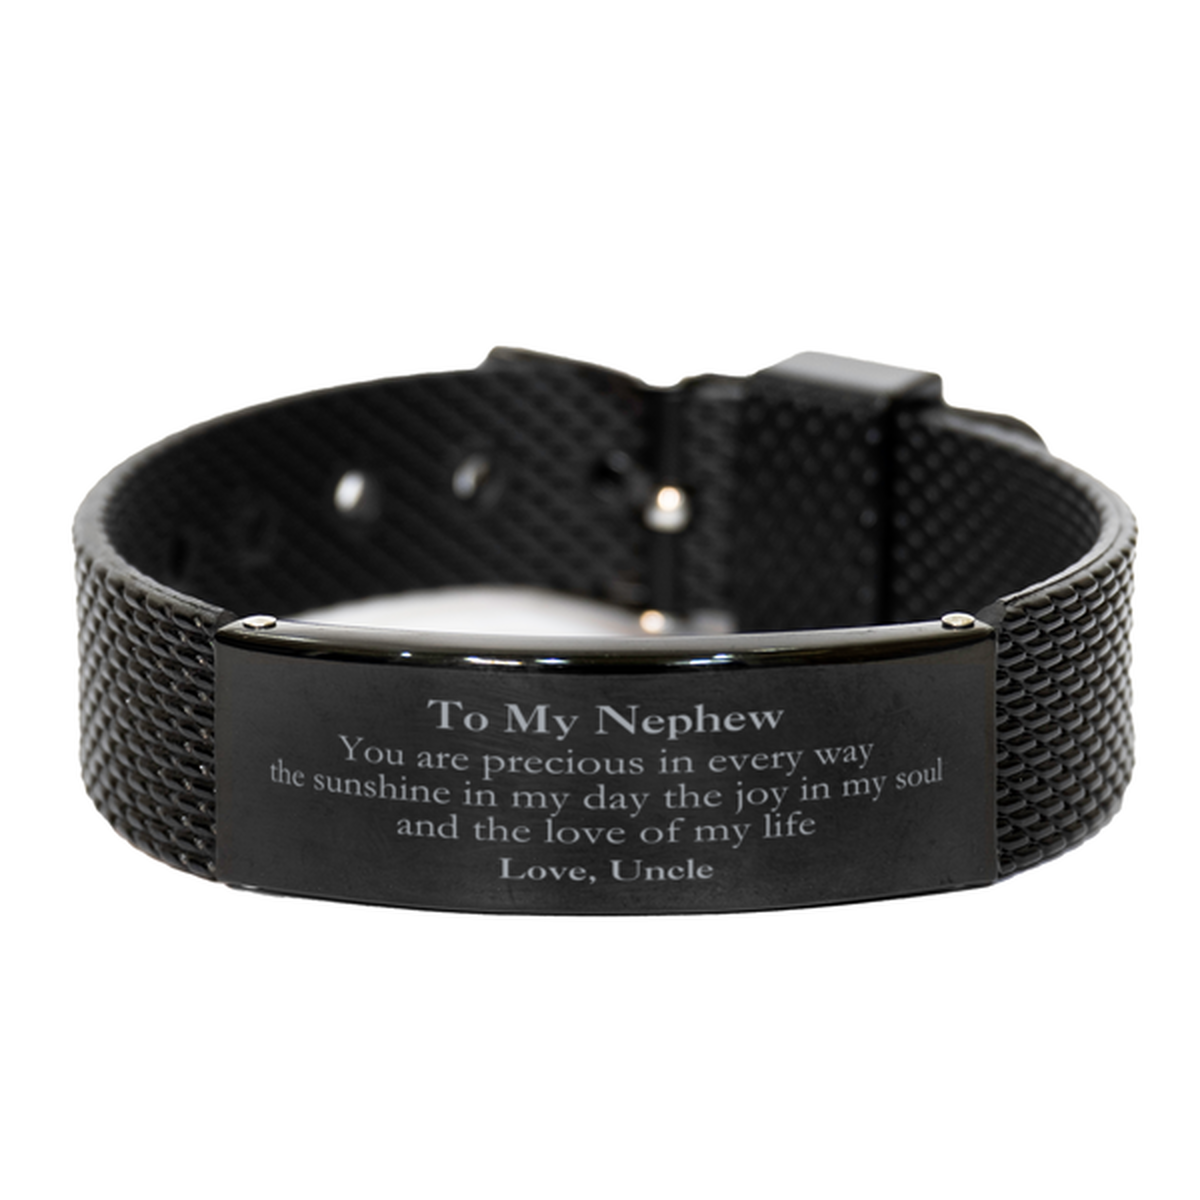 Graduation Gifts for Nephew Black Shark Mesh Bracelet Present from Uncle, Christmas Nephew Birthday Gifts Nephew You are precious in every way the sunshine in my day. Love, Uncle